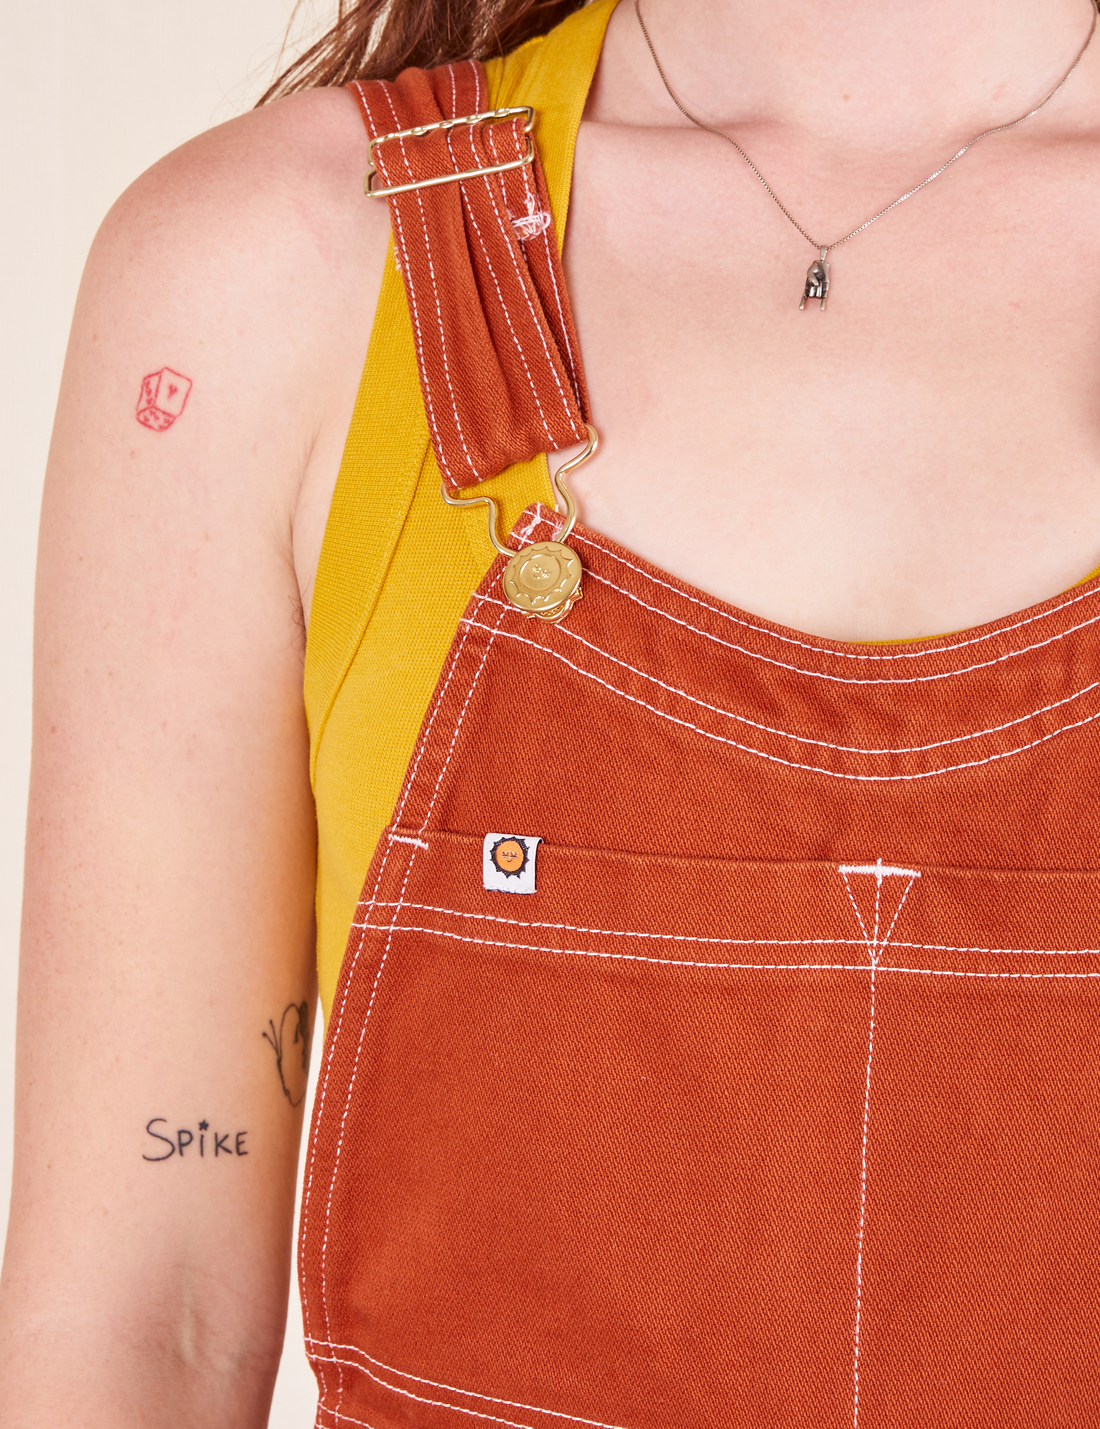 Original Overalls in Burnt Terracotta front close up white stitching and gold hardware 